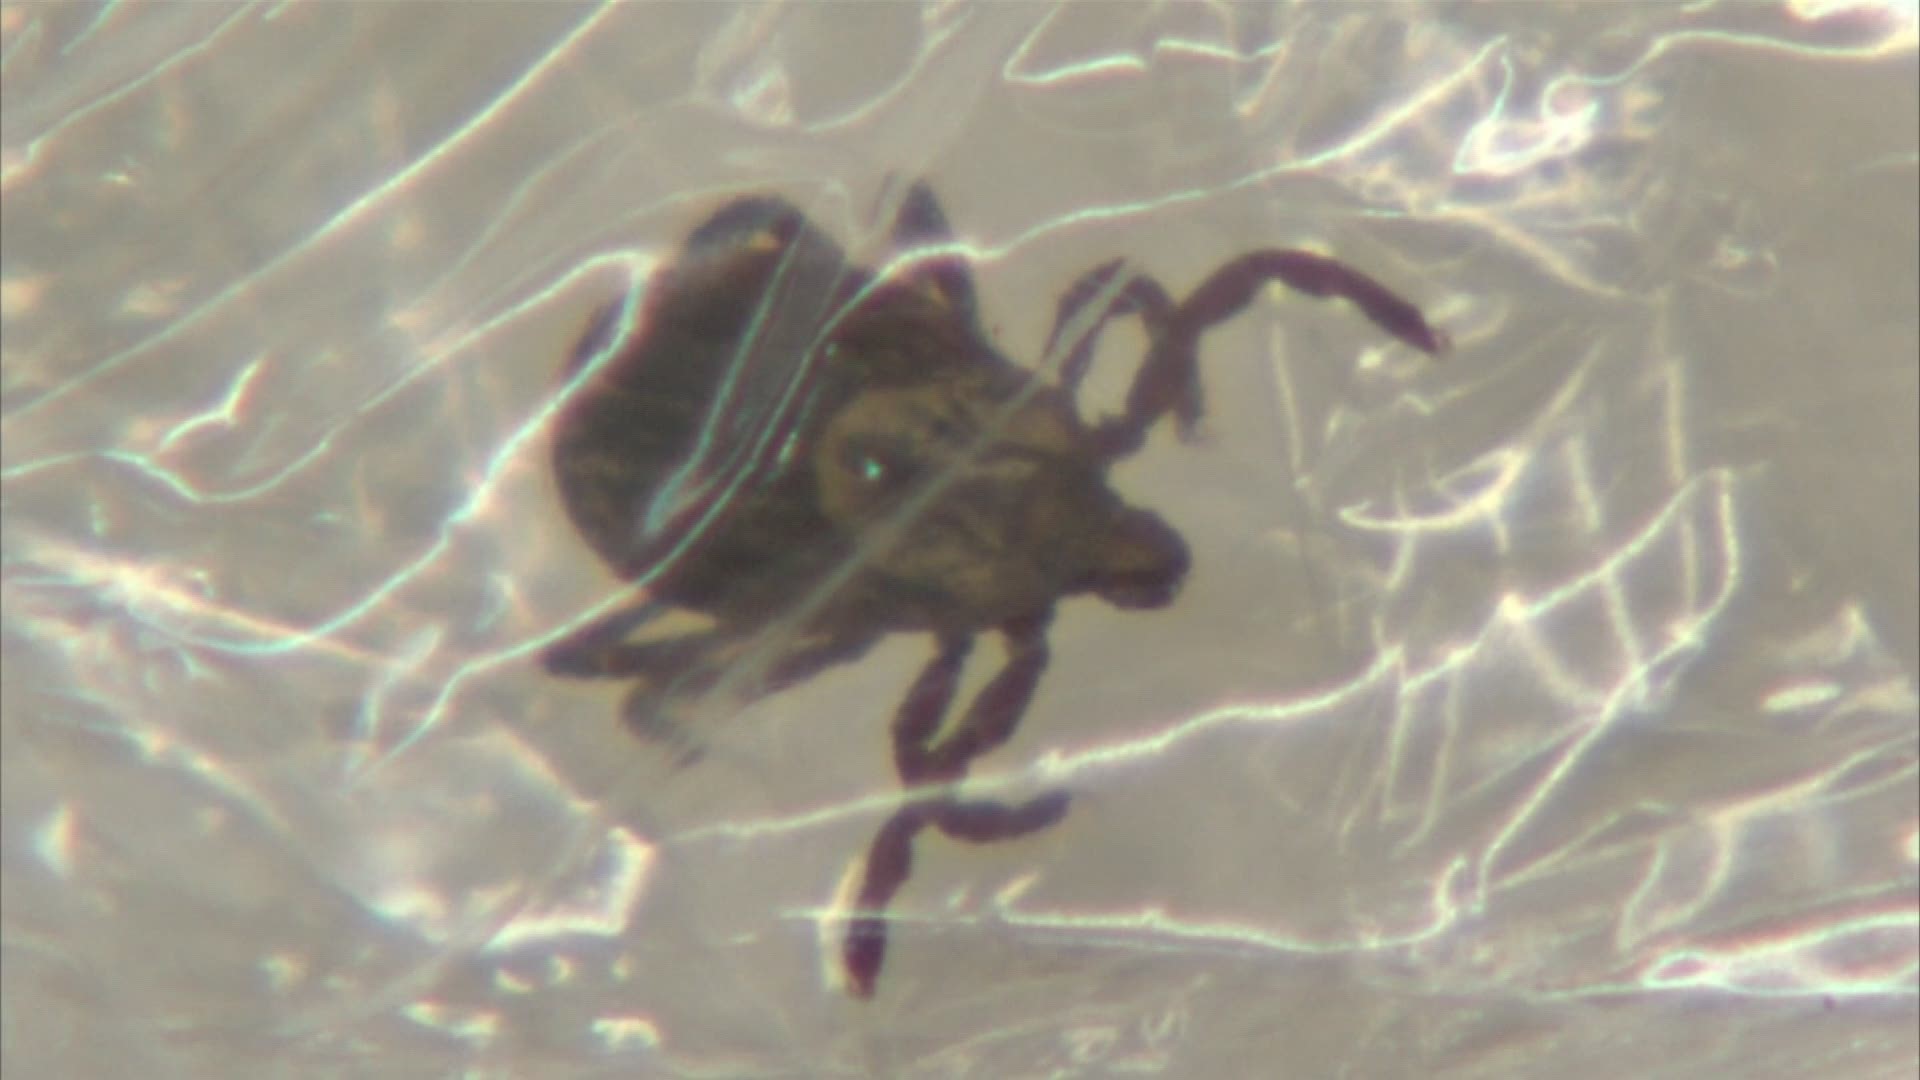 As tick populations are increasing, cases of Lyme Disease are on the rise.